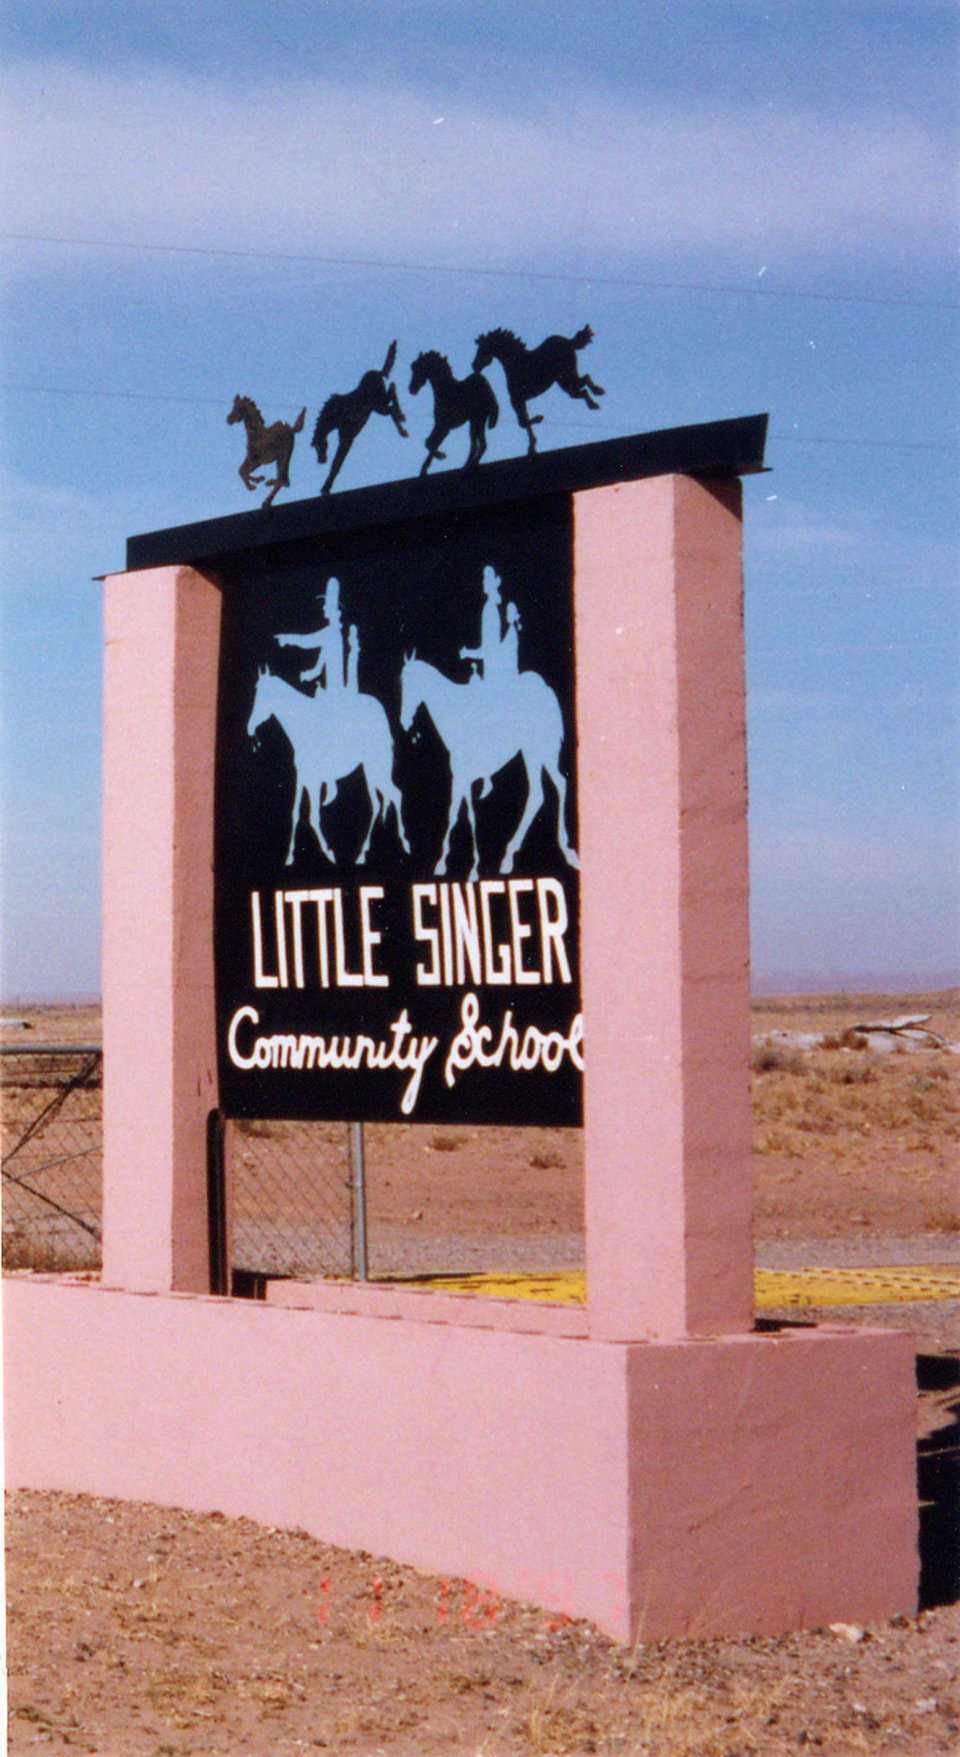 Artsy Entrance — This school was named after Little Singer, a Navajo Medicine Man, who urged the community to build a school.